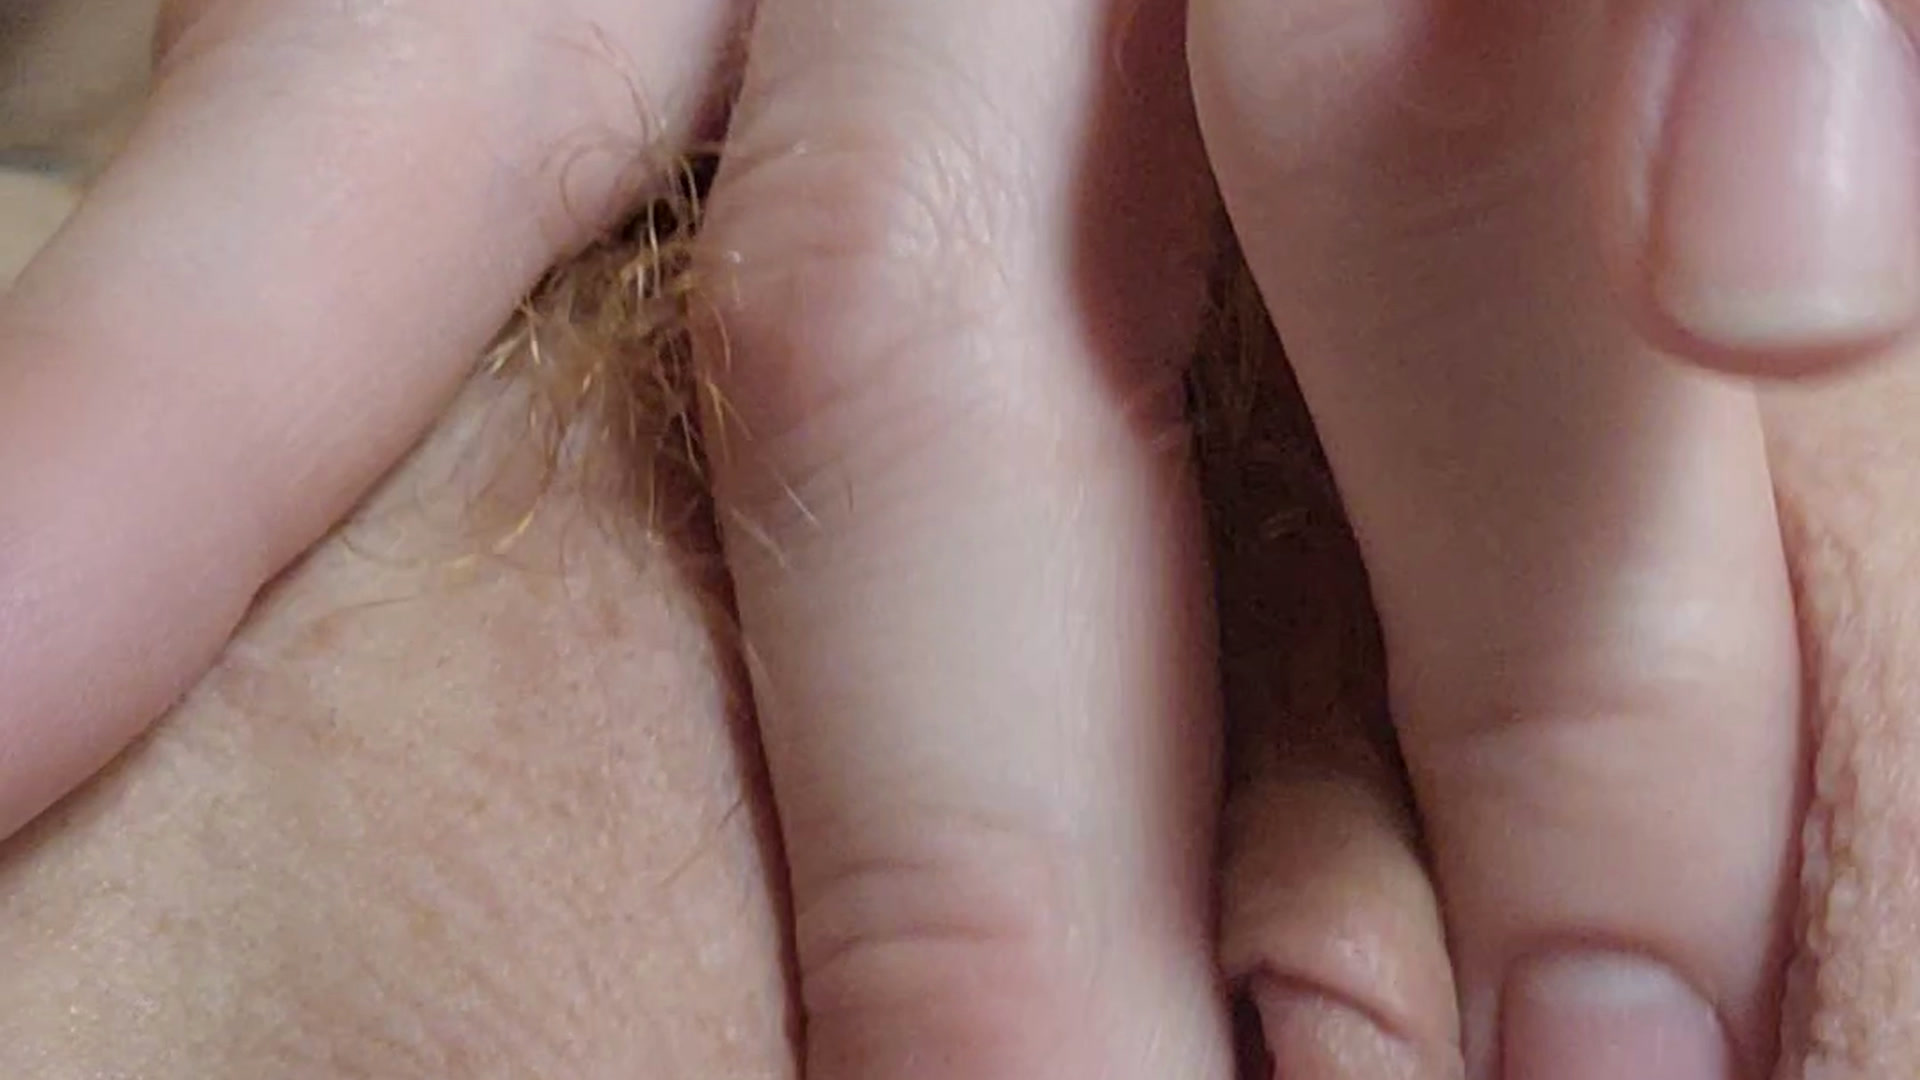 How many fingers fit my tight wet pussy?